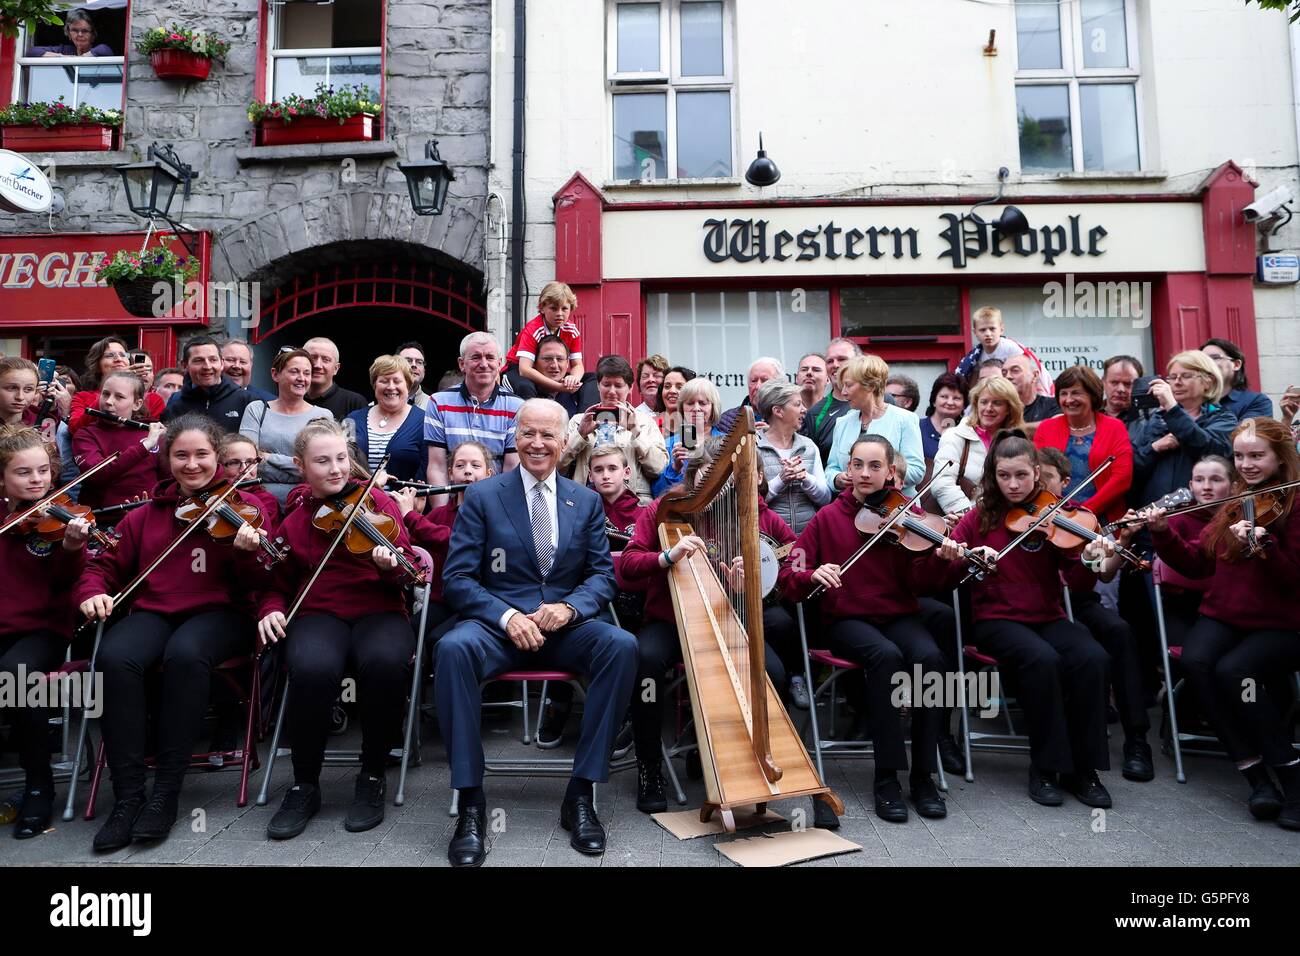 U.S. Vice President Joe Biden poses with members of the local traditional band, Rolling Wave during a visit to his ancestral home June 22, 2016 in Castlebar, County Mayo, Ireland. Stock Photo